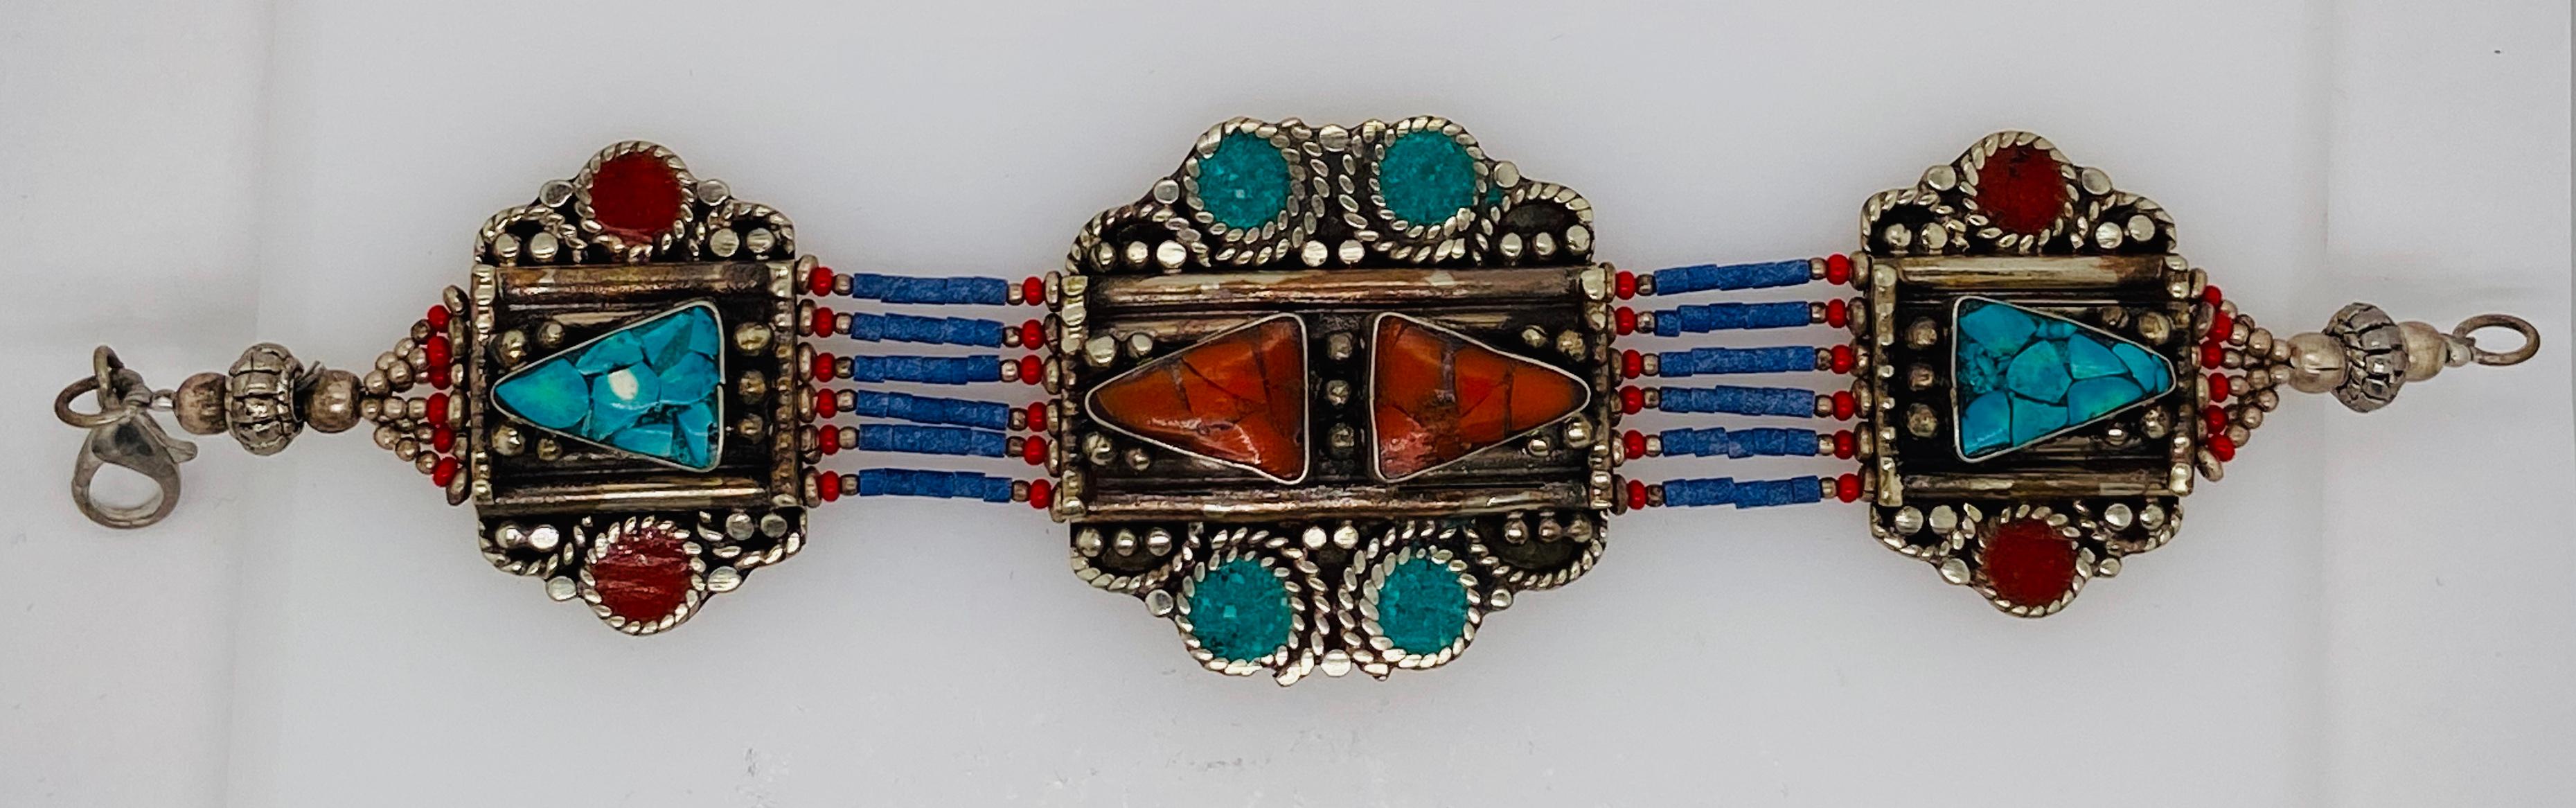 A stunning handmade MoroccanTribal Berber tribal pure silver bracelet. This beautiful and one of a kind piece of jewelry made around 1920s by the berber tribes in Morocco features genuine turquoise stores and other natural stones in red, blue and